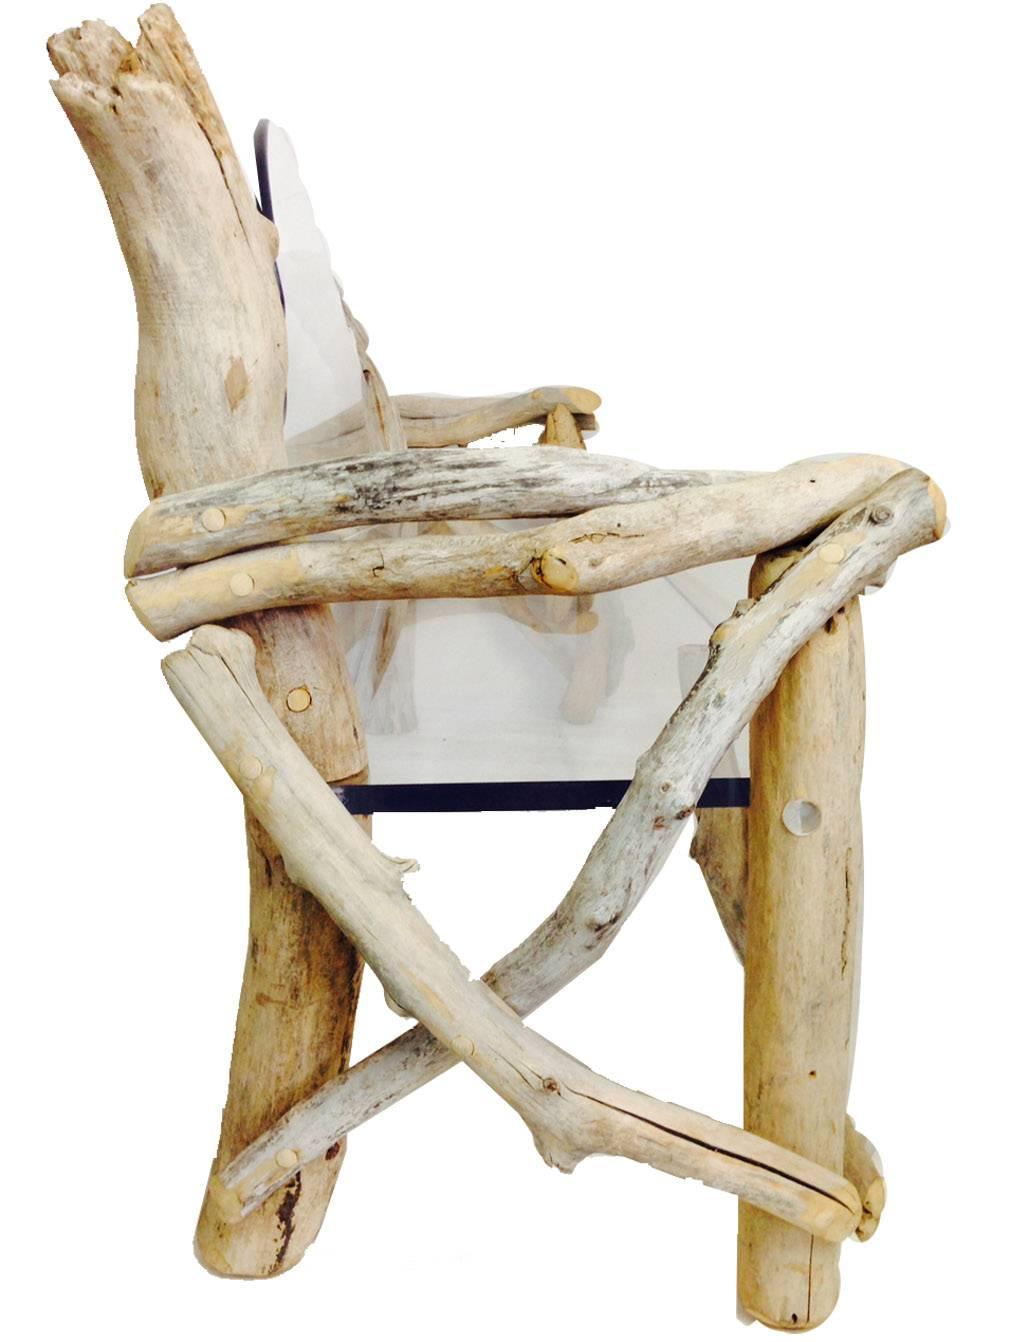 21st Century Modern meets Baroque on this incredible one of a kind American Made vintage driftwood and 1